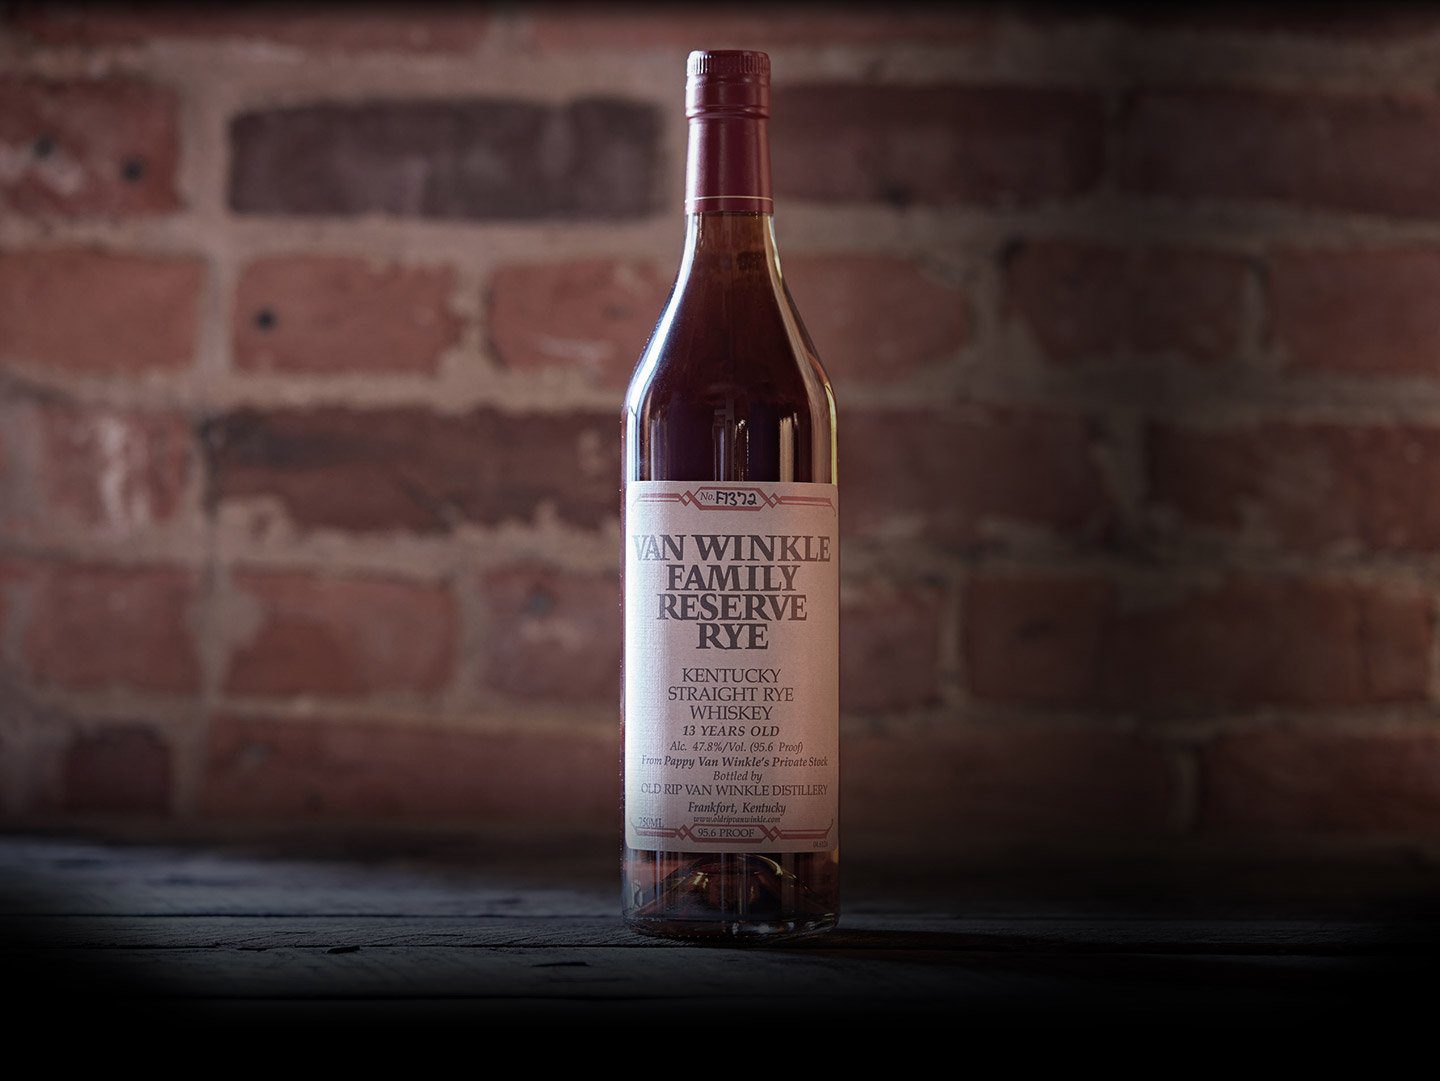 Photo of a bottle of Van Winkle Family Reserve Rye 13-year 95.6 proof bourbon